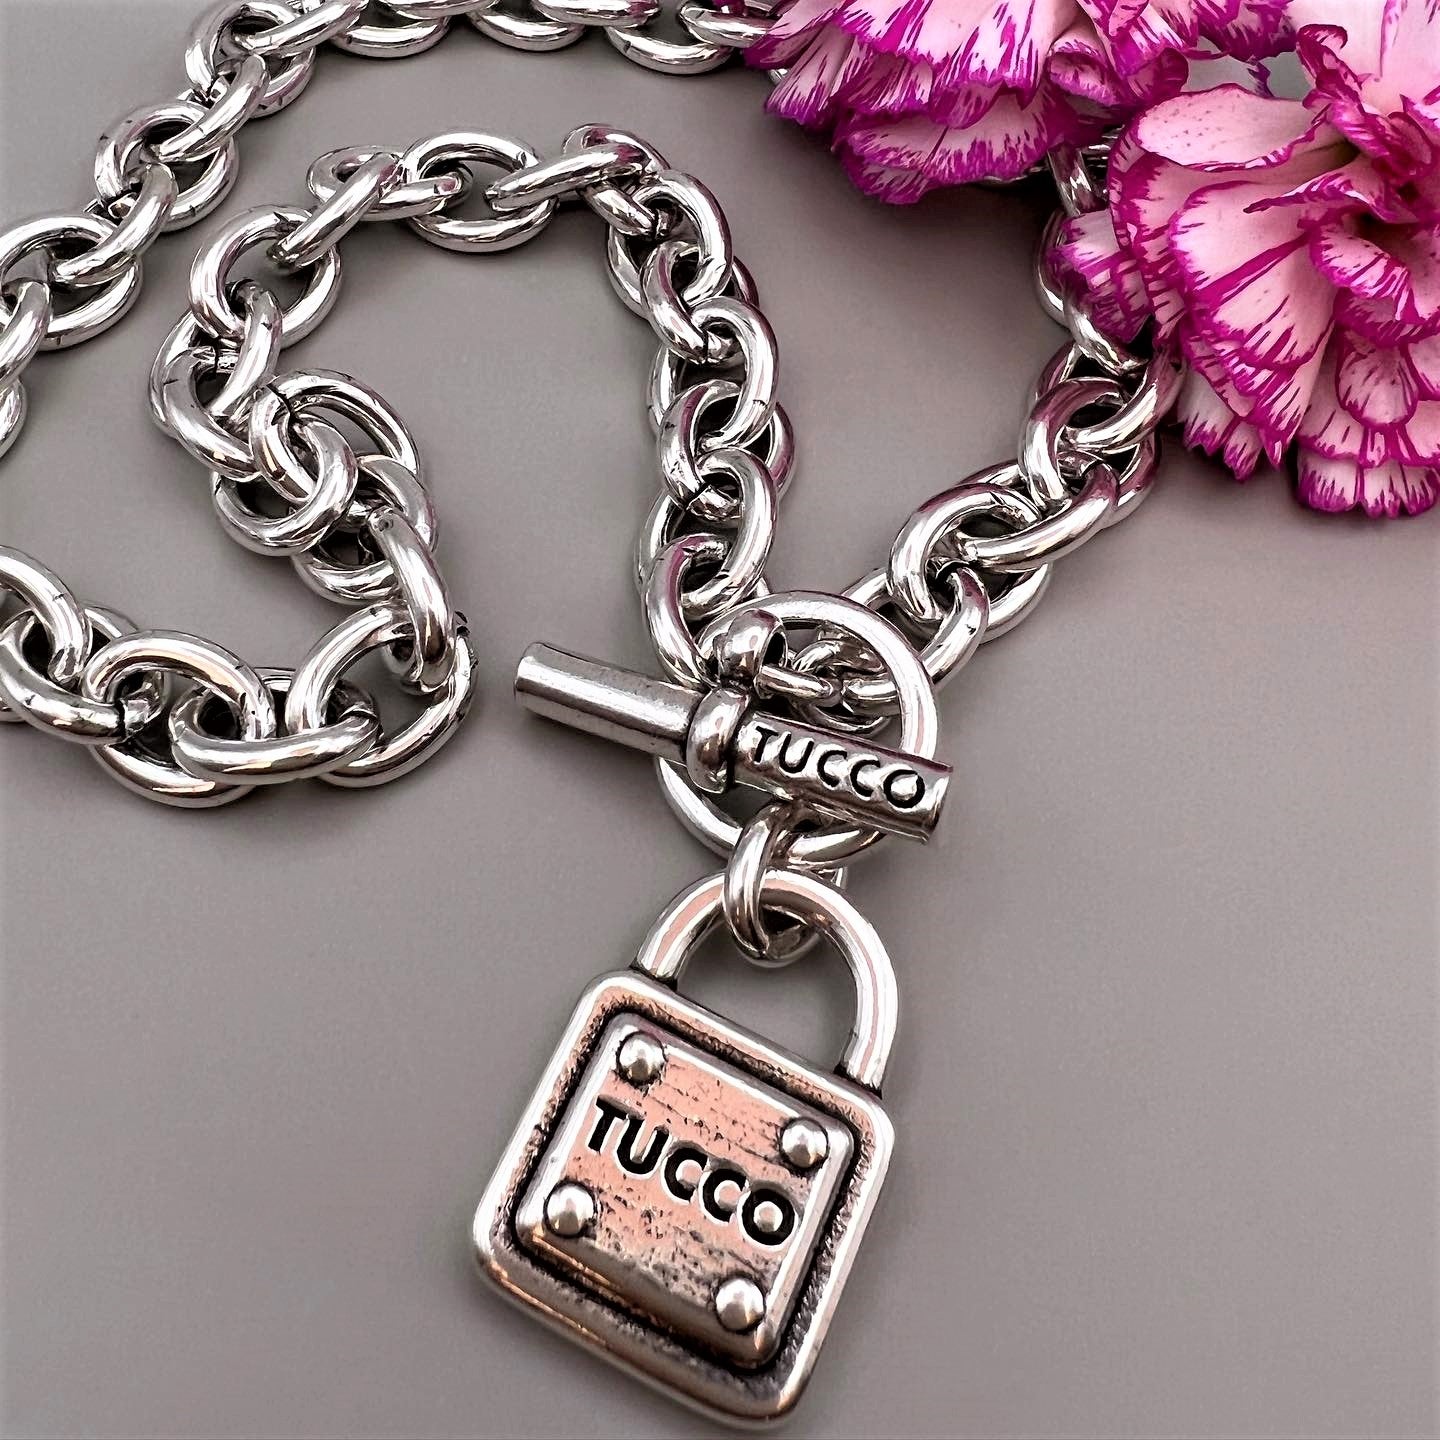 "Closed" Necklace